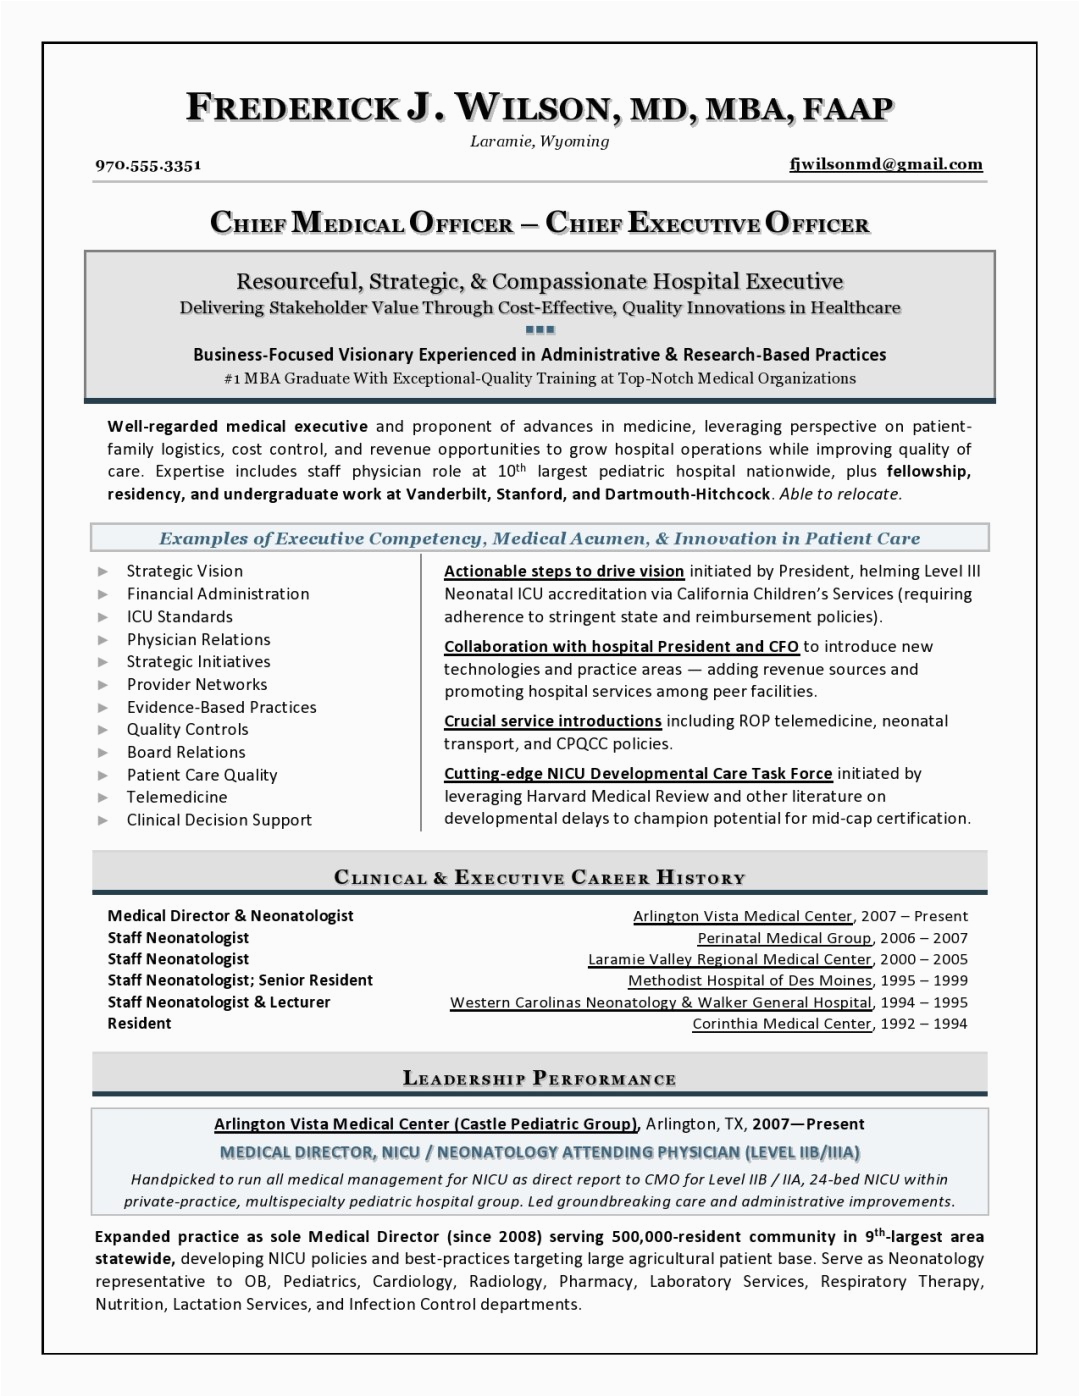 Sample Resume Of Chief Clinical Officer Award Winning Chief Medical Ficer Resume